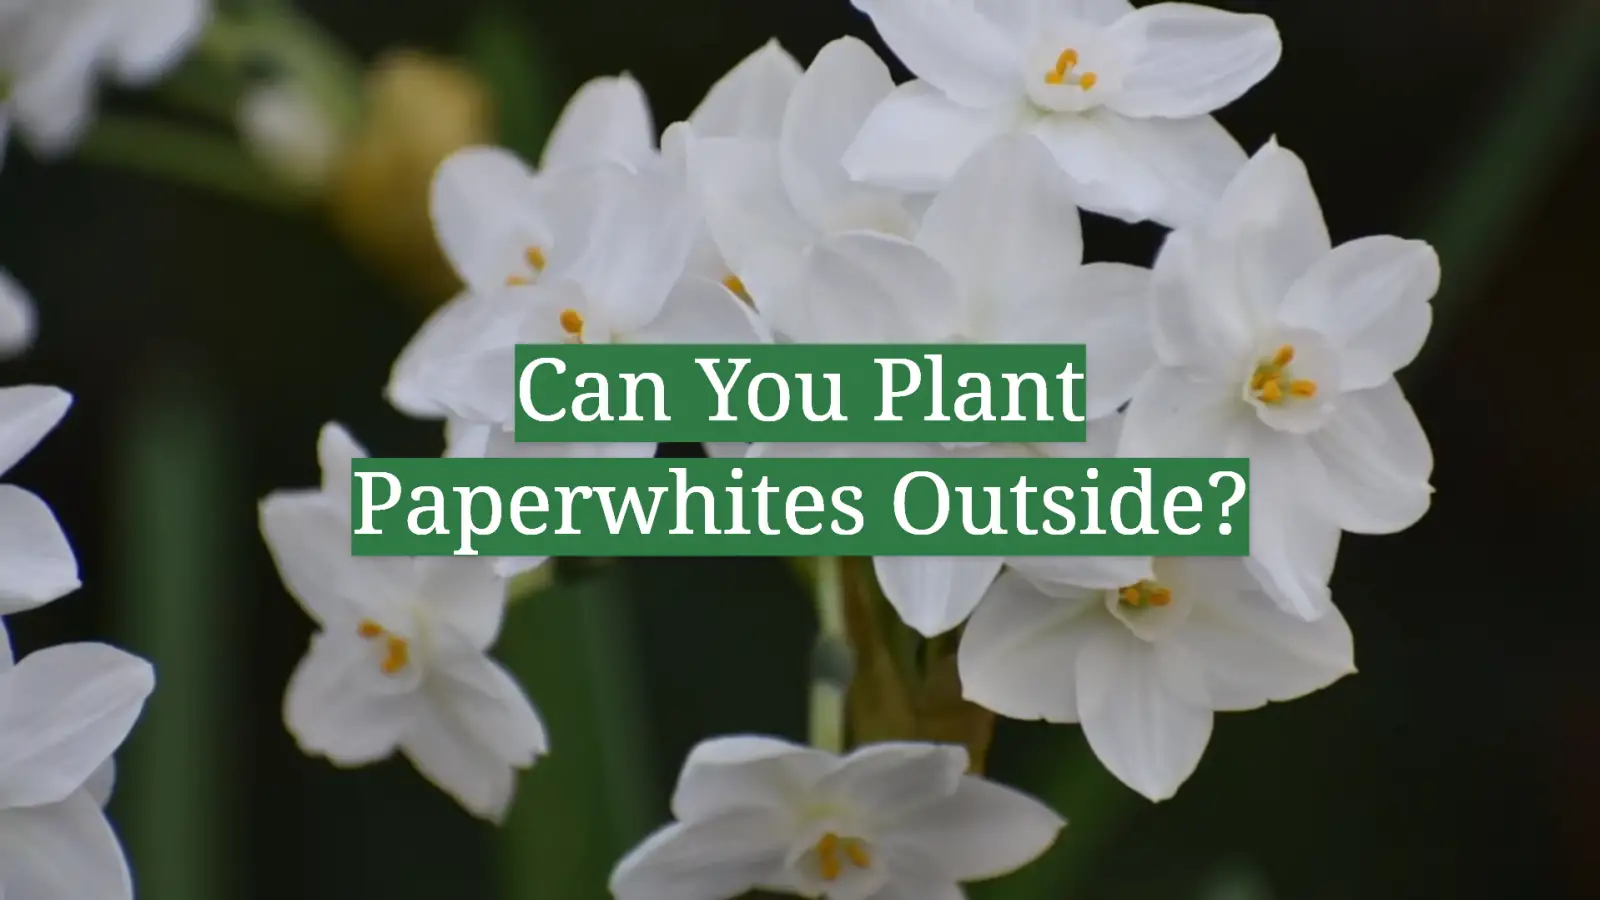 Can You Plant Paperwhites Outside?